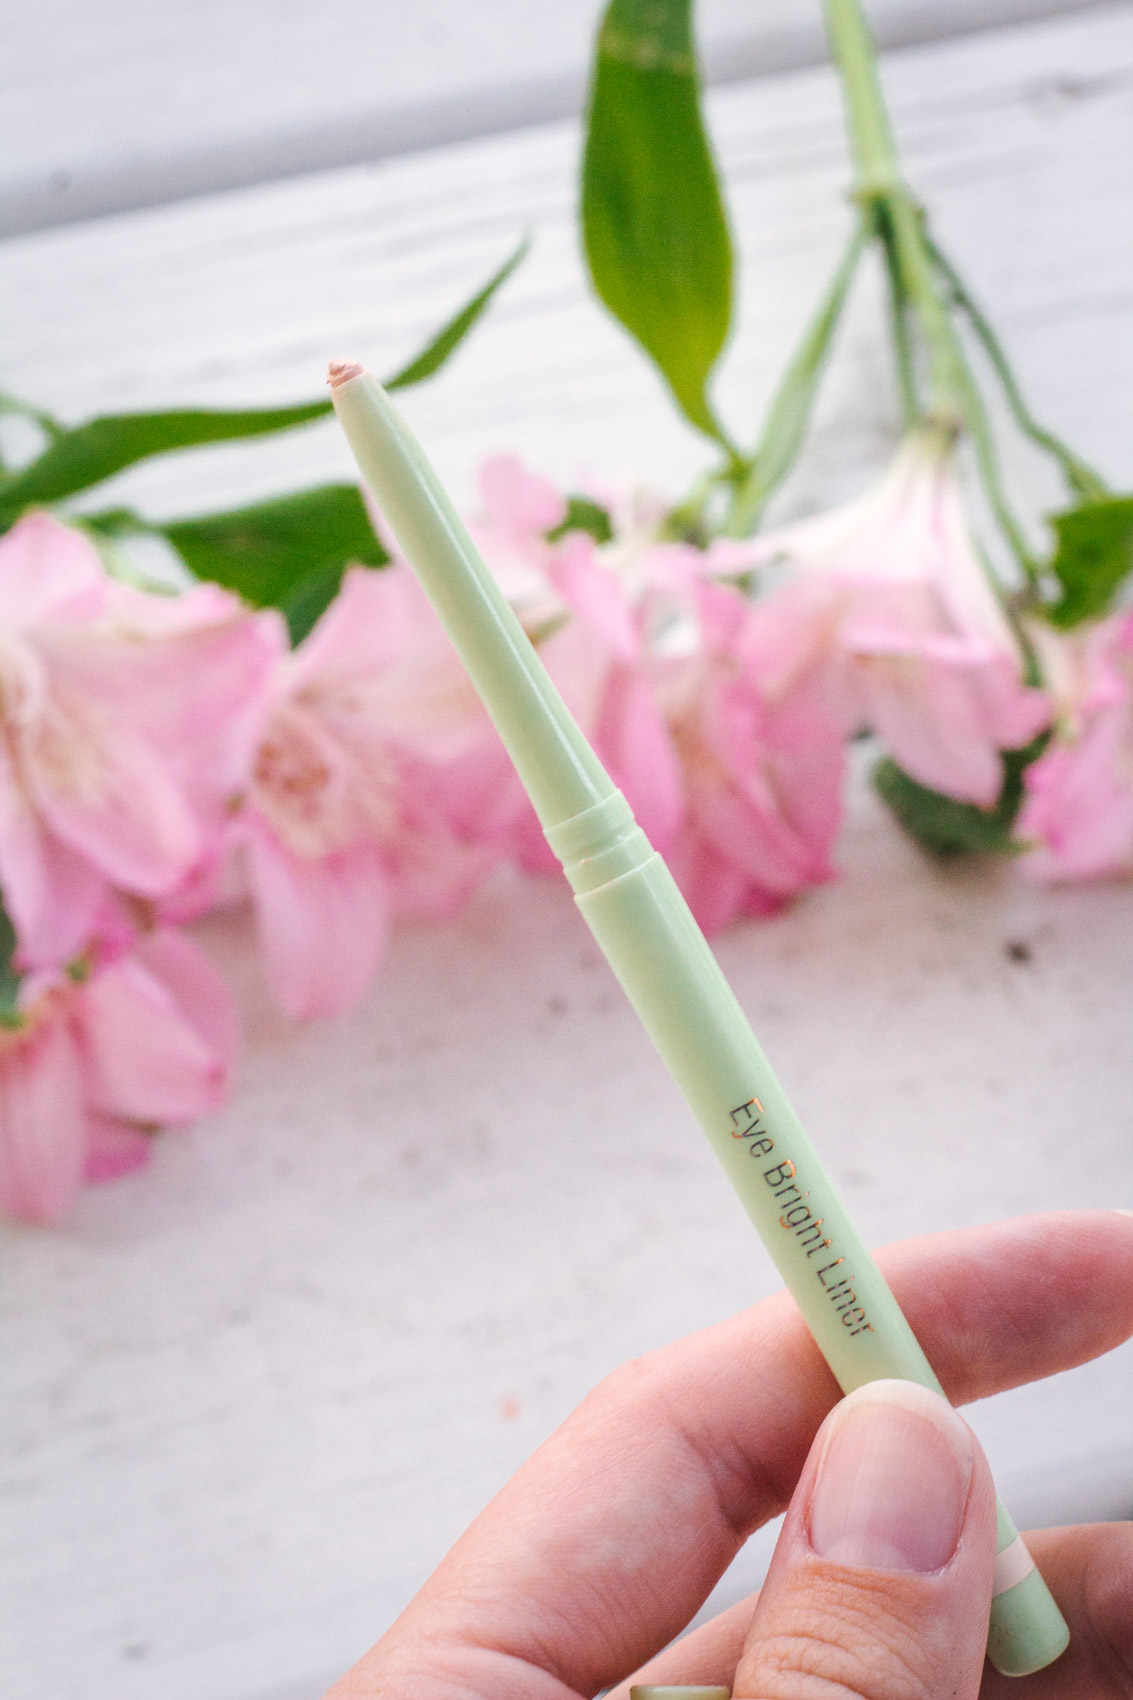 Pixi's Eye Bright Liner - This brightens eyes and makes the white part of your eyes look whiter so that you like wide awake even on your sleepiest days. 